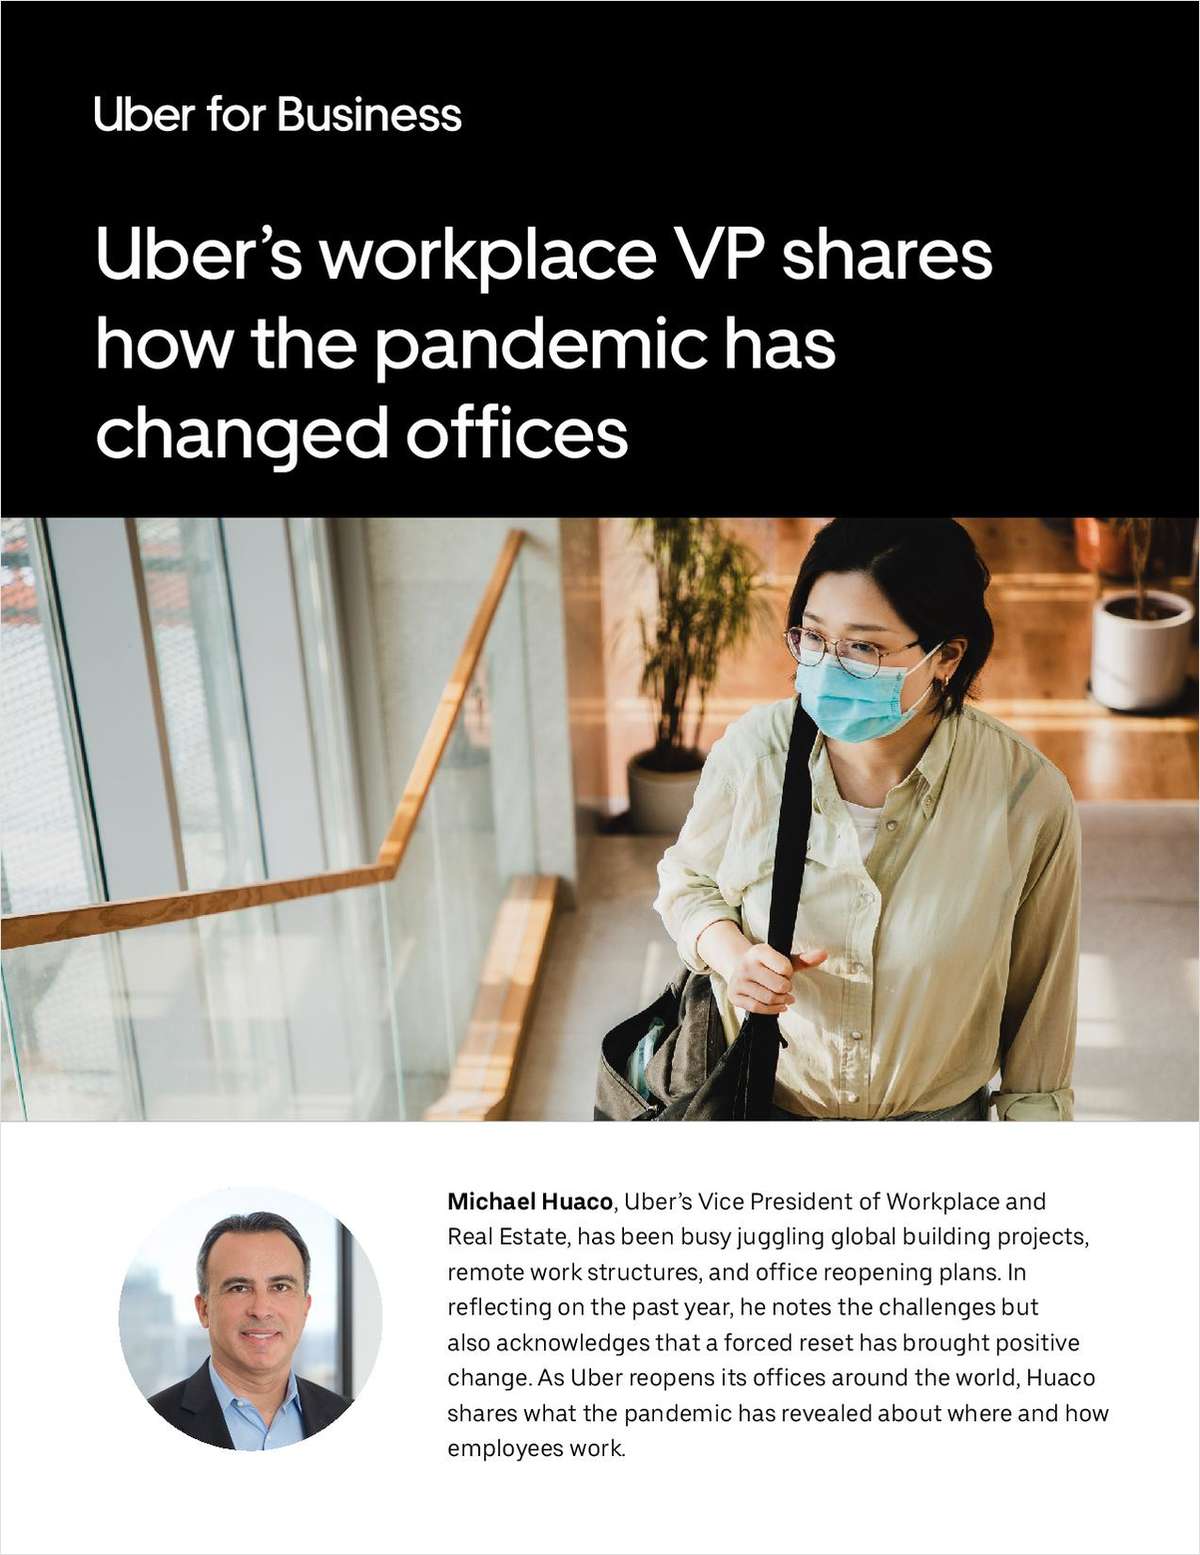 Uber's workplace VP shares how the pandemic has changed offices